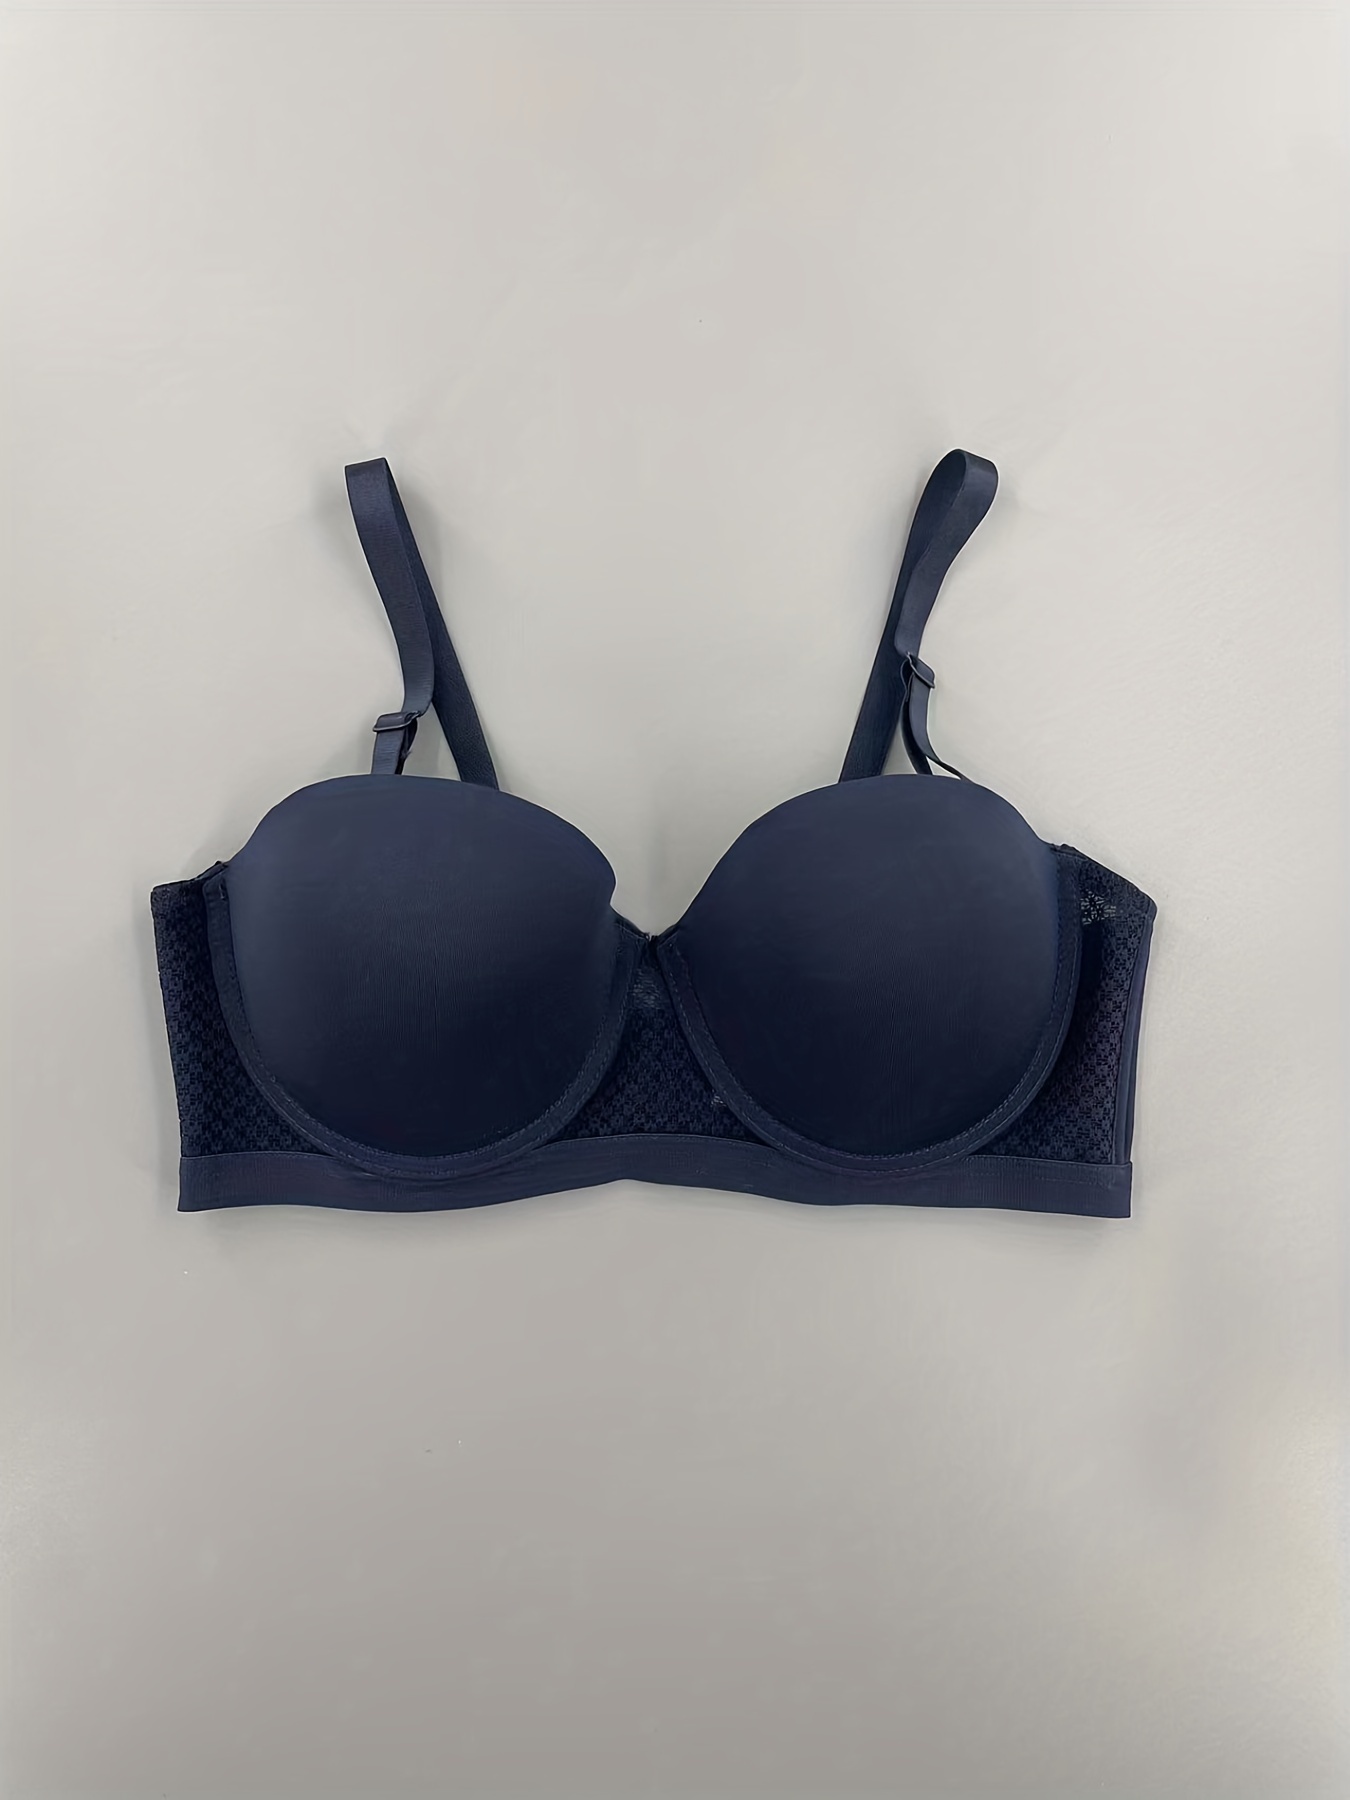 Strapless Bras in the color blue for Women on sale